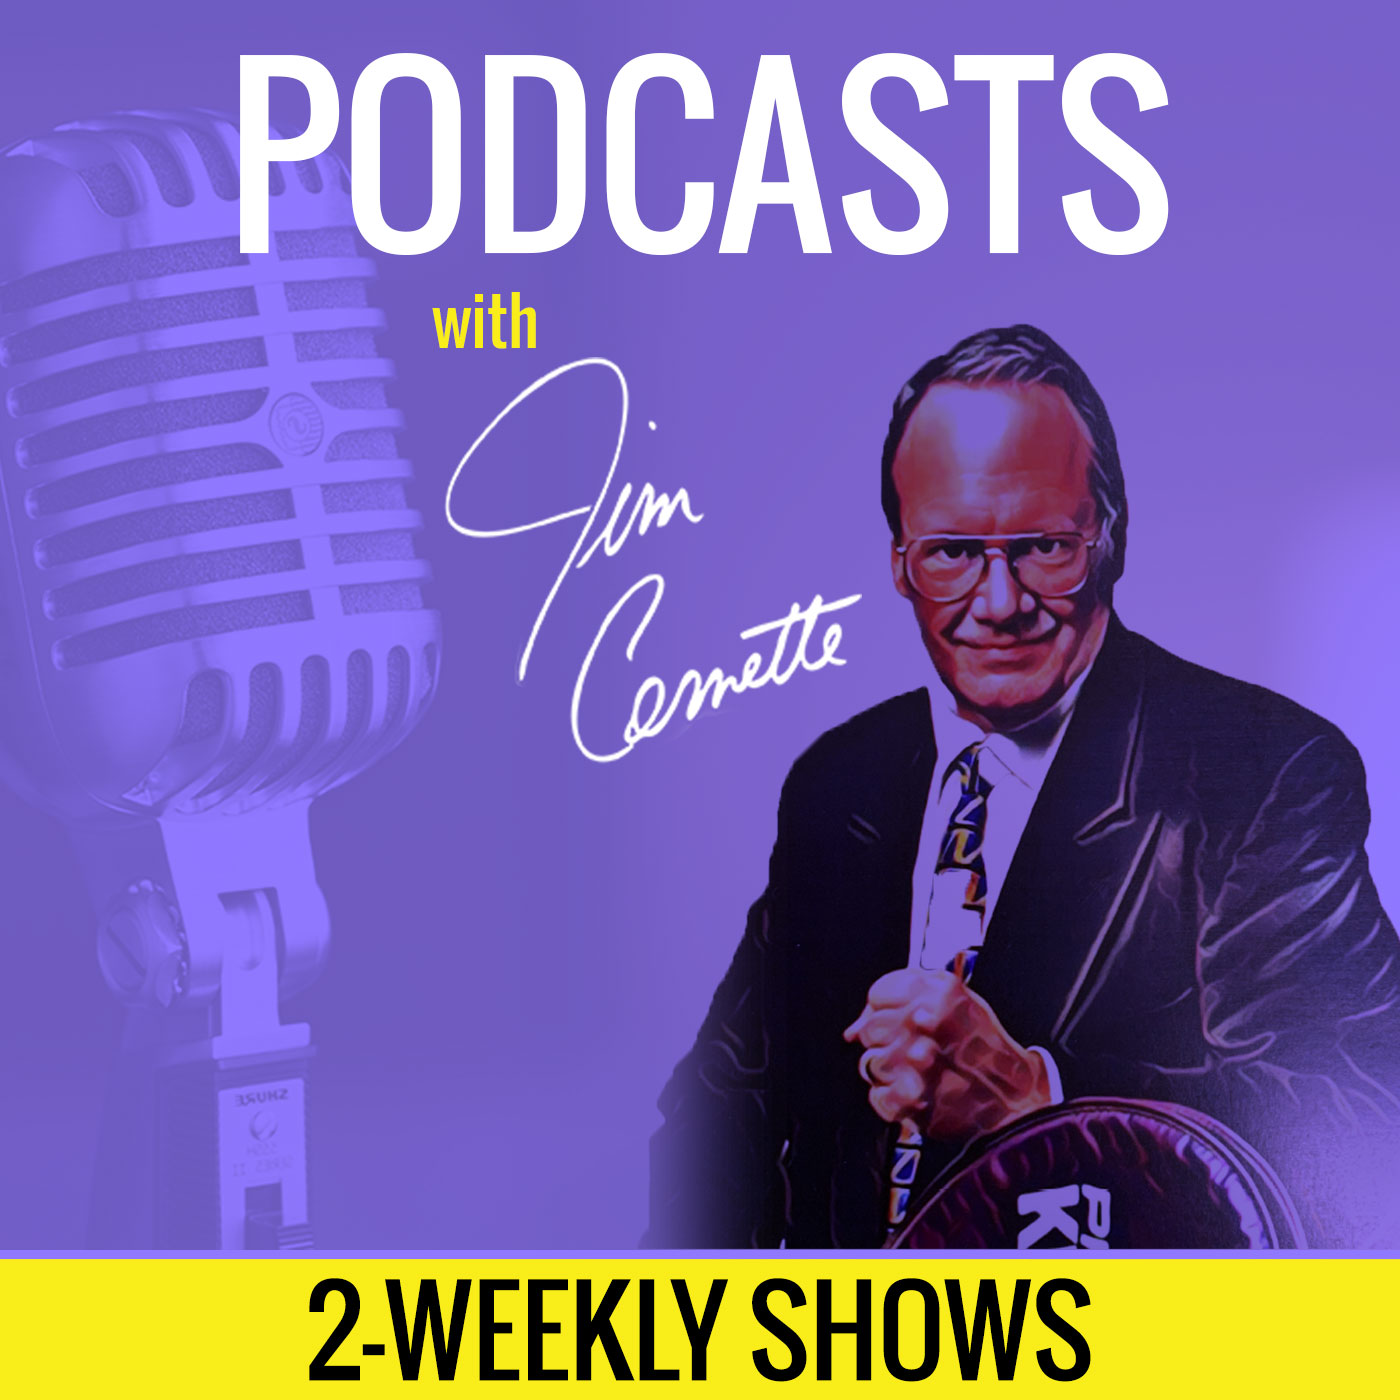 Listen to Jim and Them podcast